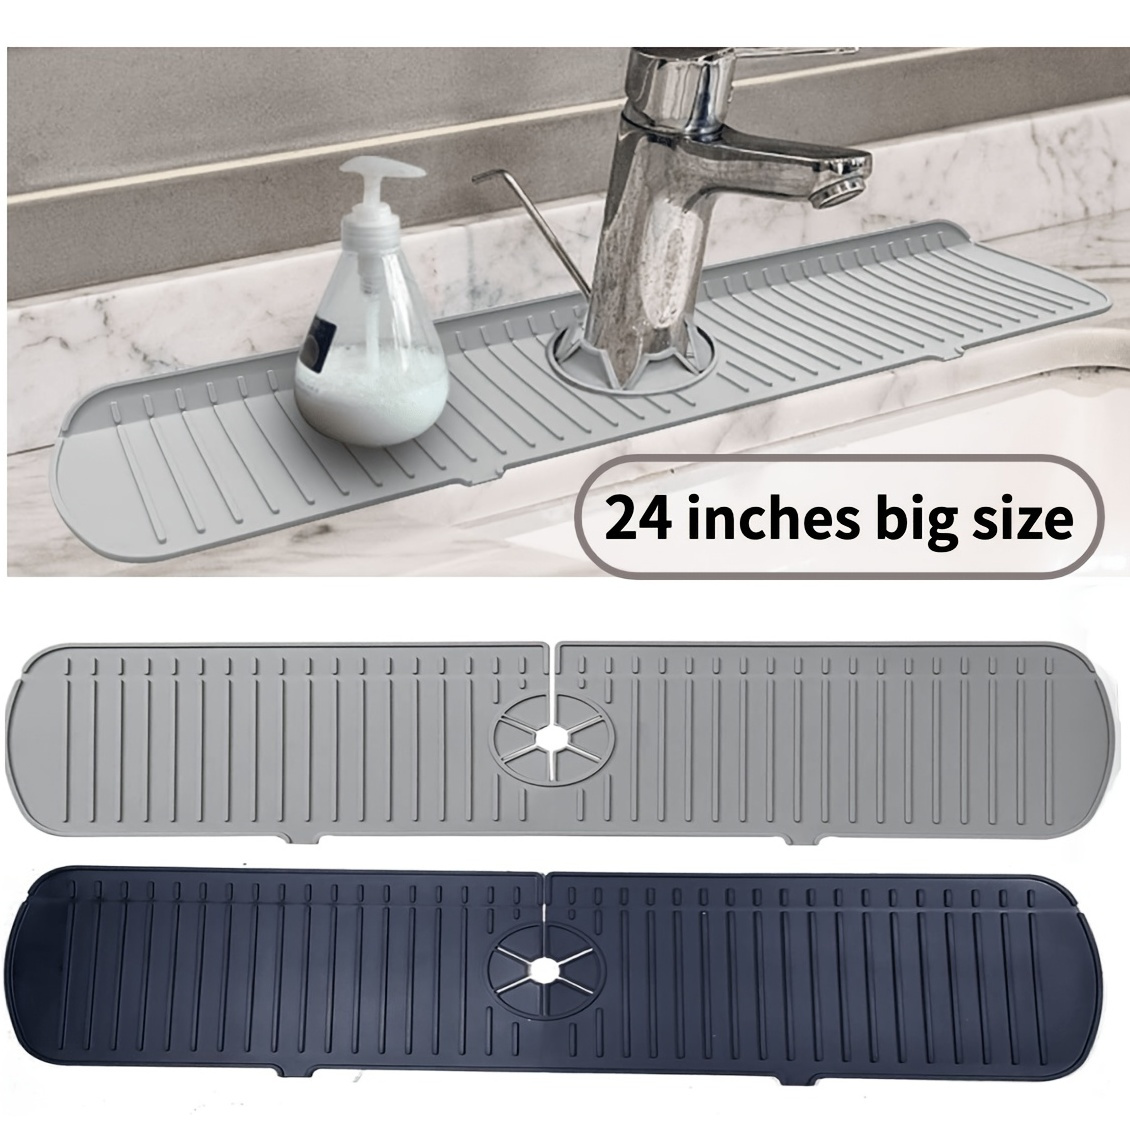 

1pc Faucet Sink Splash Guard Mat, Silicone Faucet Water Catcher Mat Cover, Sink Draining Pad Behind Faucet, Gray Black Silicone Drying Mat For Bathroom Countertop Protect Bathroom Accessories